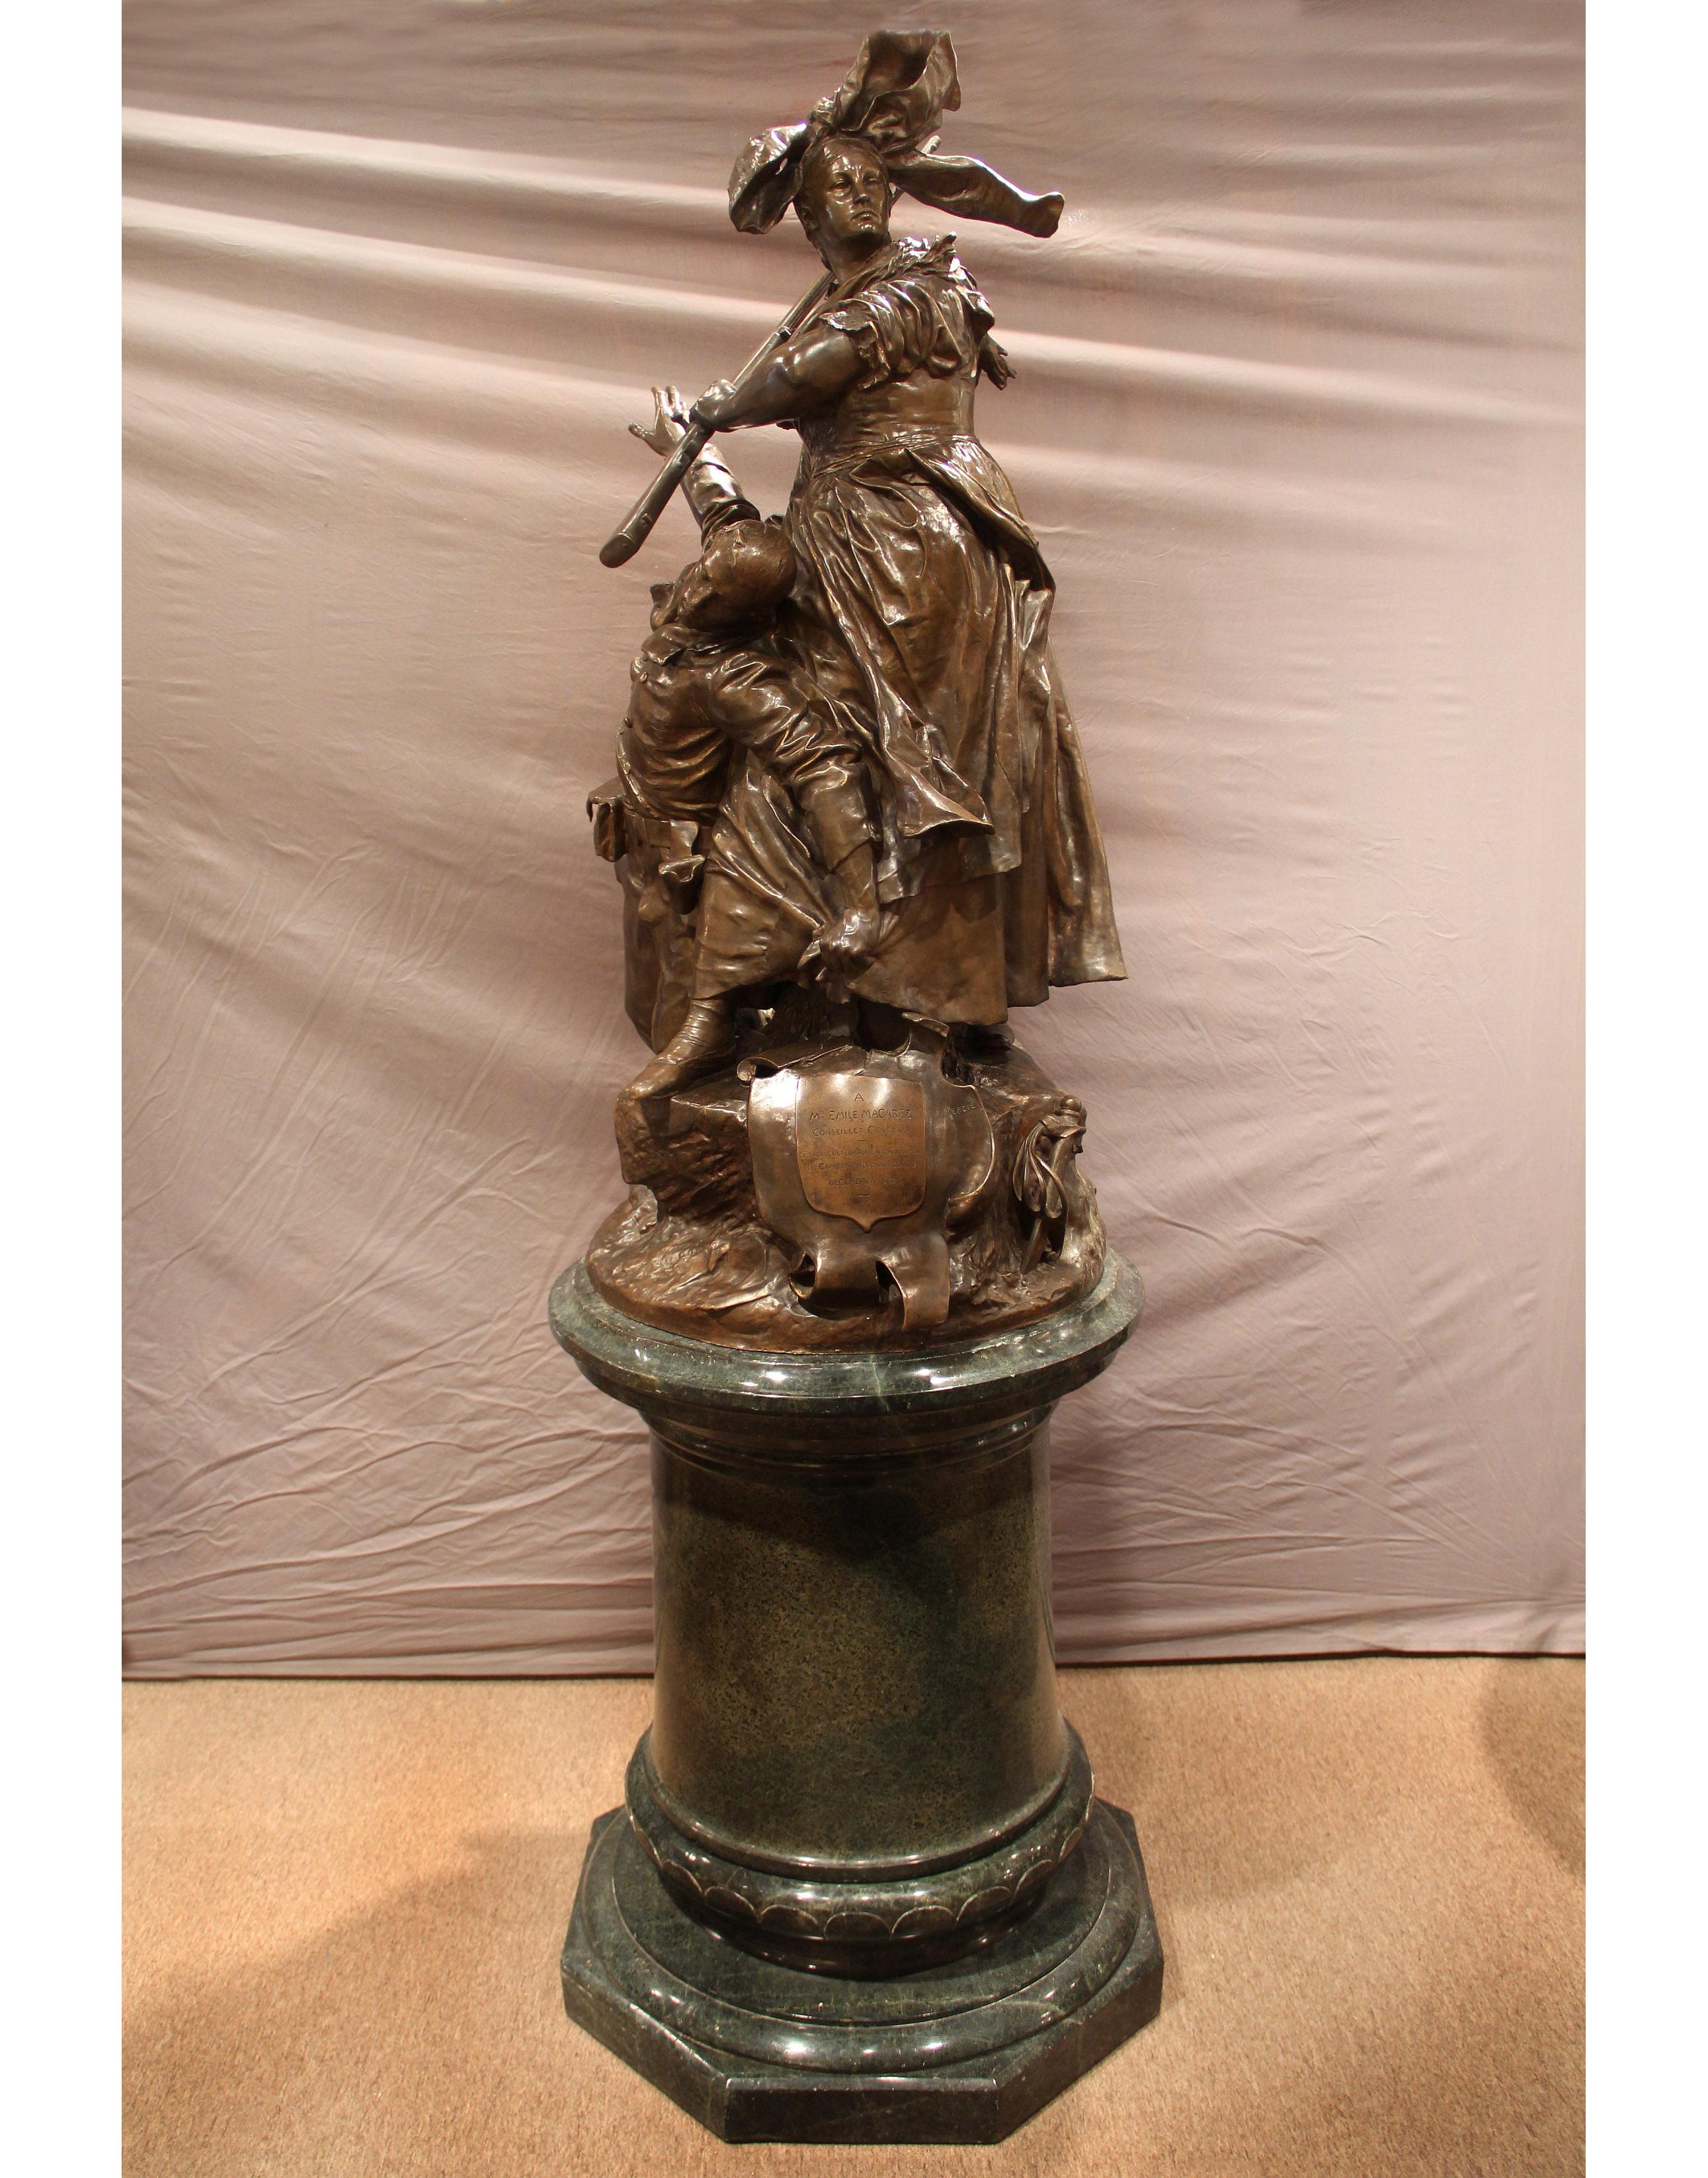 A Large and Exceptional Late 19th Century Patinated Bronze Figural Group Entitled “Quand Meme” by Mercié and Barbedienne on Pedestal

Marius-Jean-Antonin Mercié and Ferdinand Barbedienne

Intended to pay tribute to the resistance of the city of